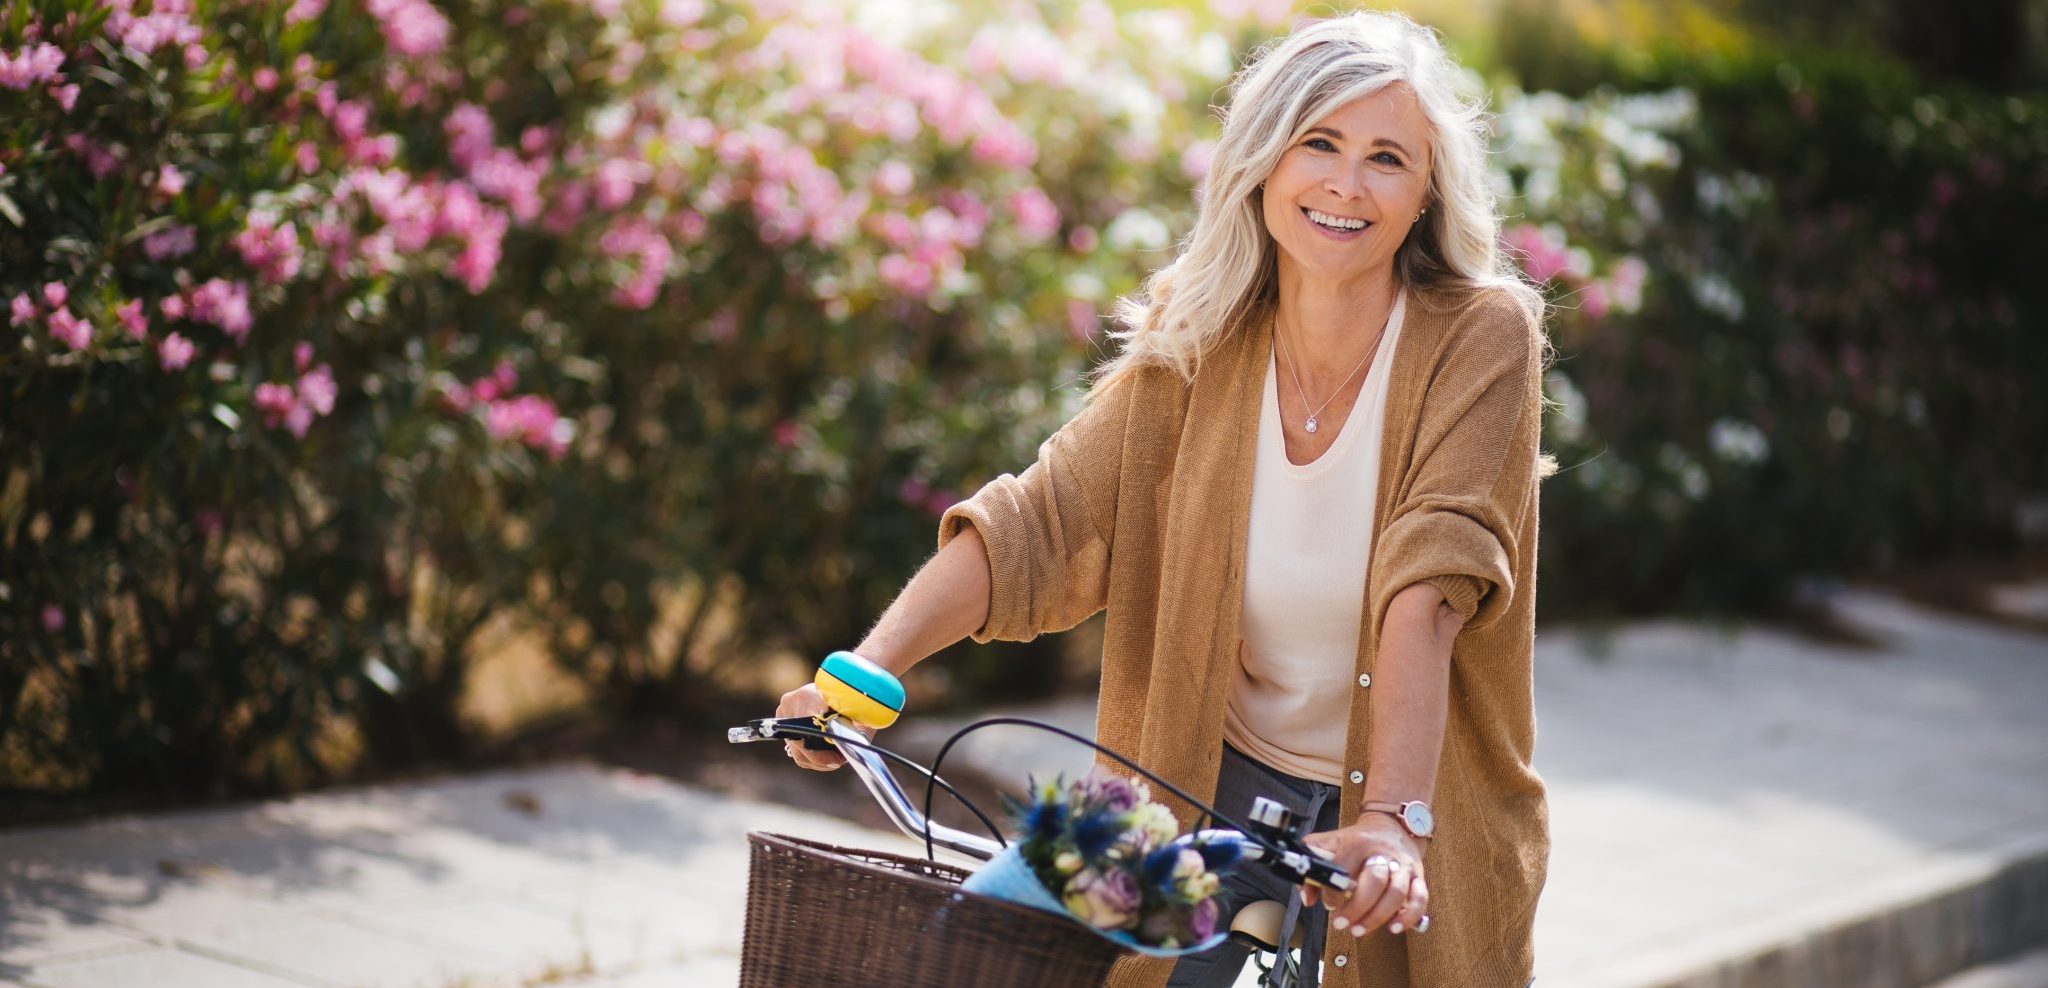 5 Totally Doable Ways to Age Well and Live Longer